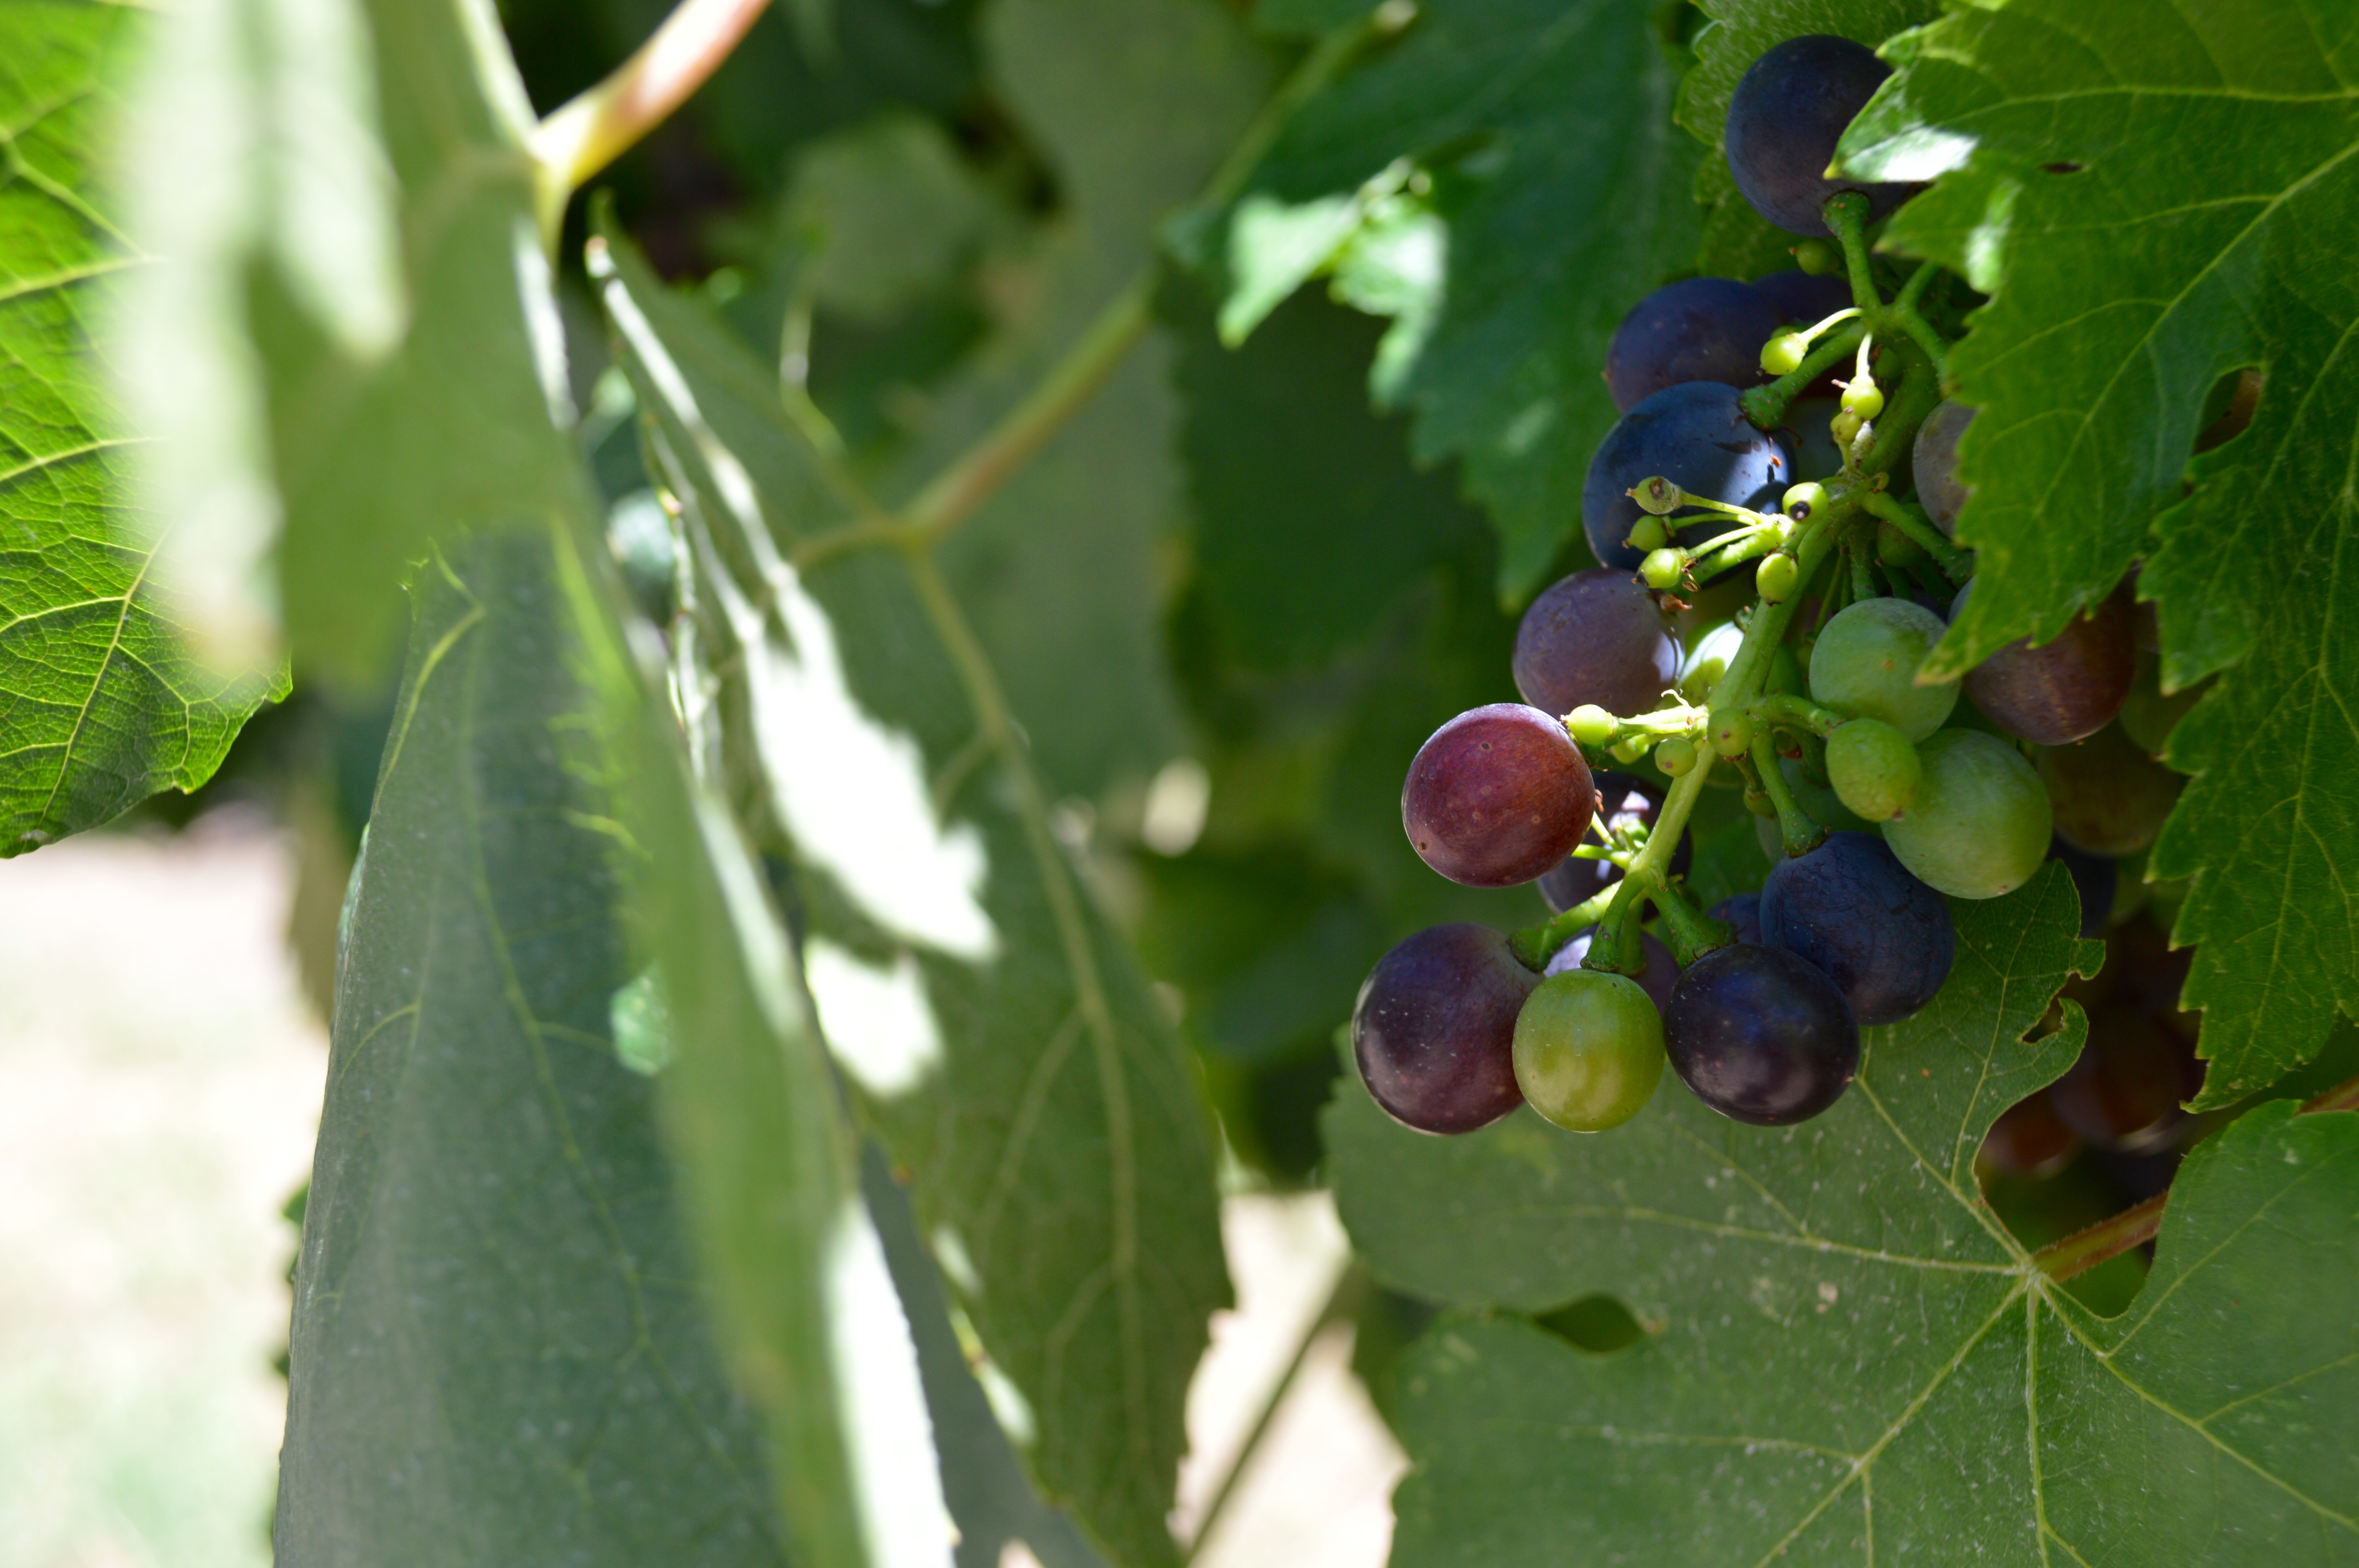 Grapes growing in the Yarra Valley